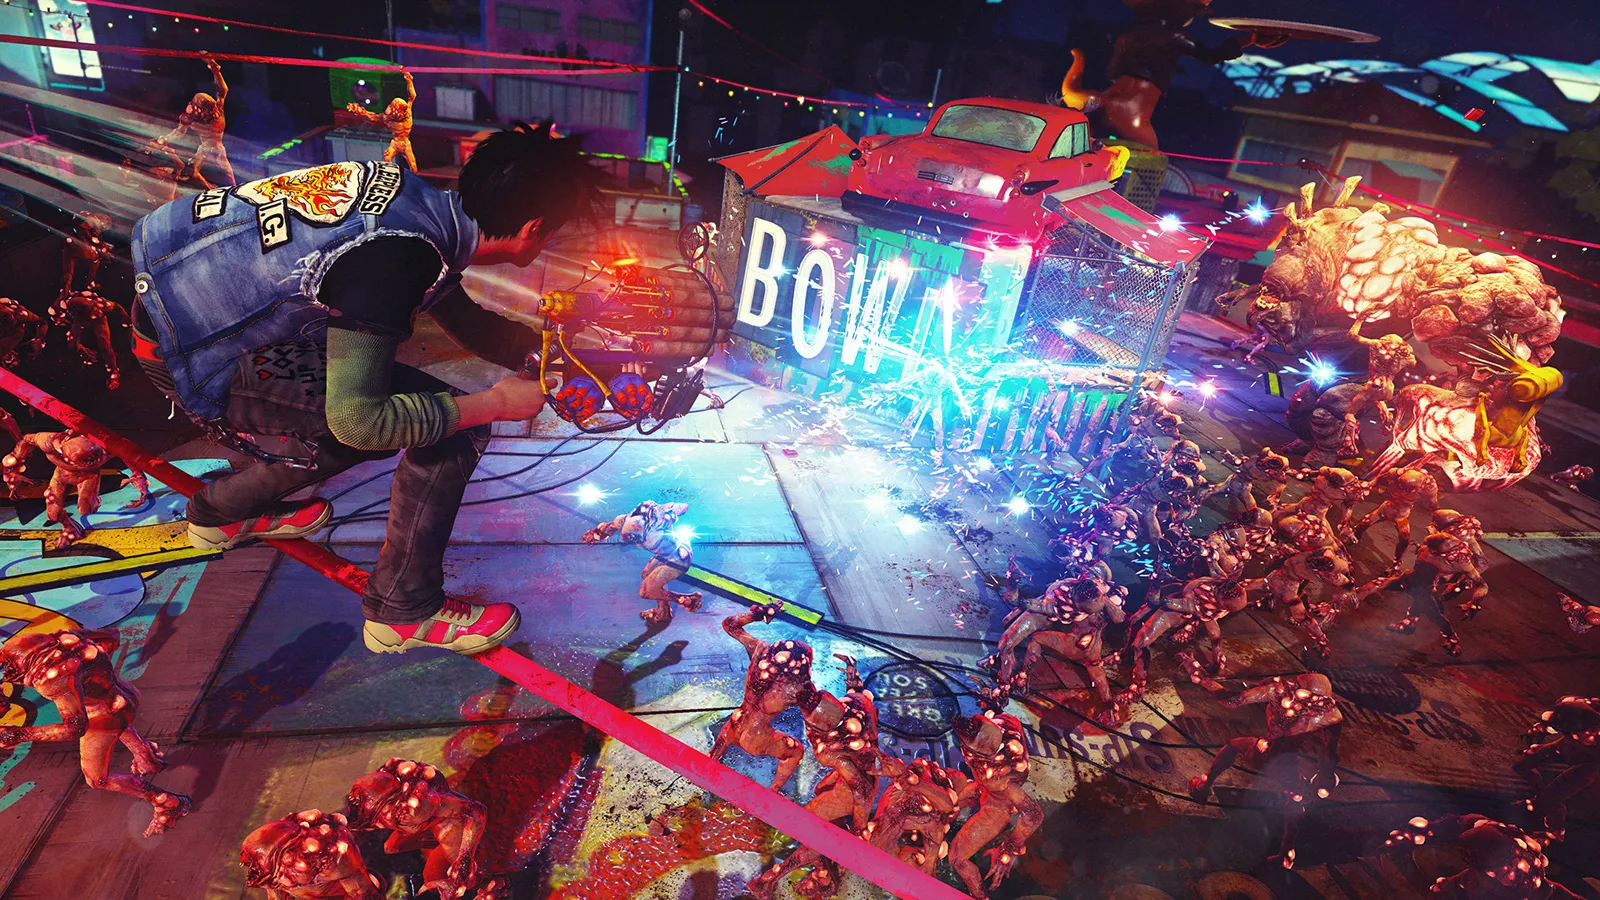 Sunset Overdrive 2 May Happen With or Without Microsoft: Insomniac Games